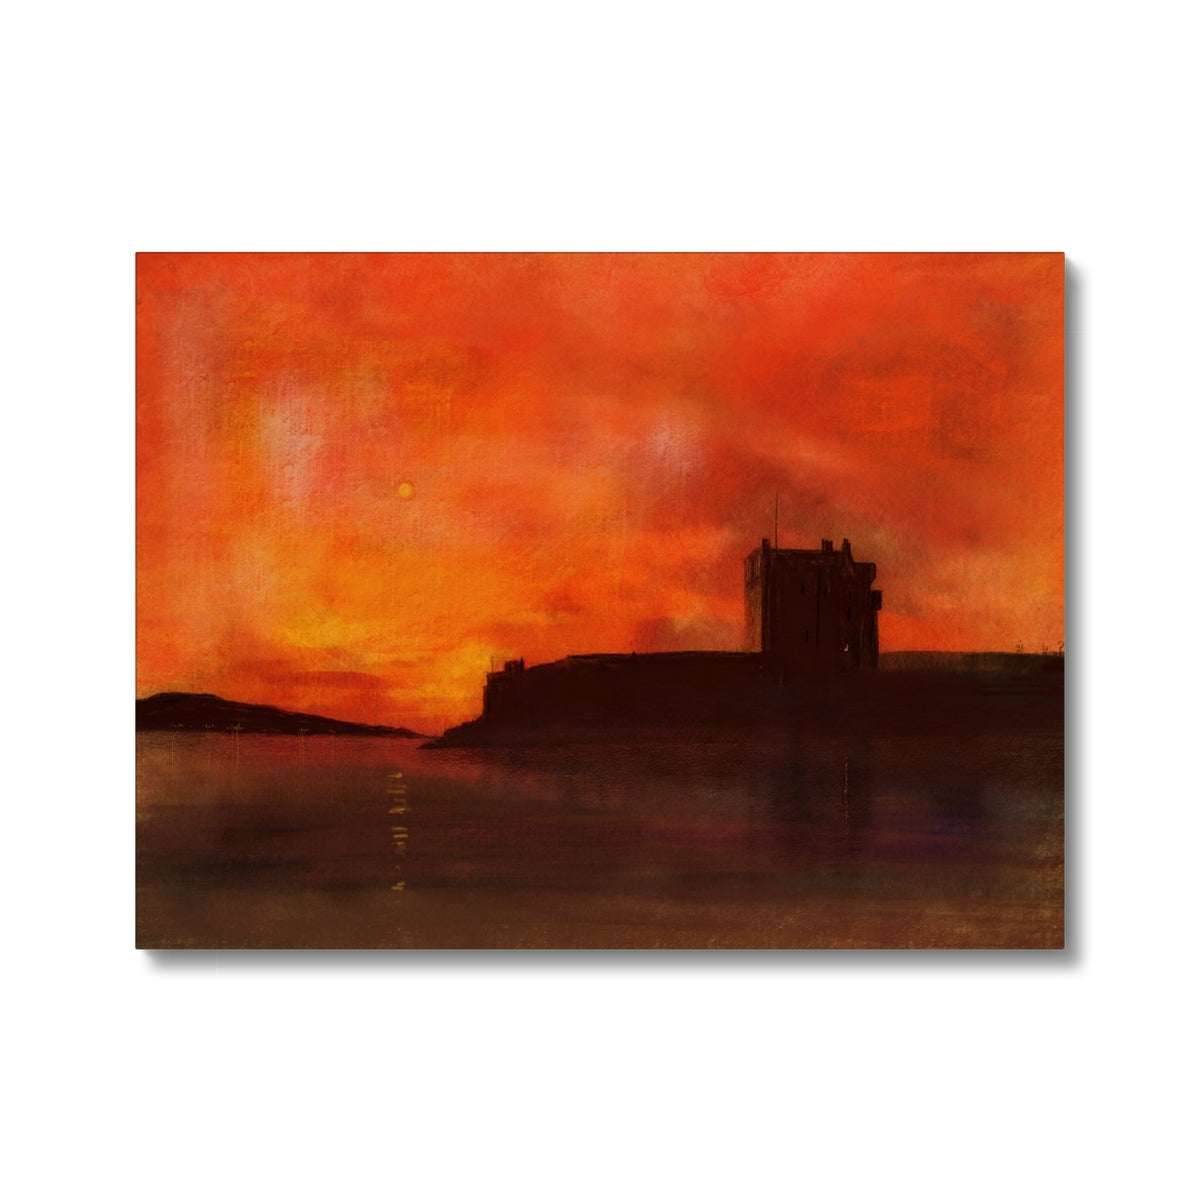 Broughty Castle Sunset Painting | Canvas From Scotland-Contemporary Stretched Canvas Prints-Historic & Iconic Scotland Art Gallery-24"x18"-Paintings, Prints, Homeware, Art Gifts From Scotland By Scottish Artist Kevin Hunter